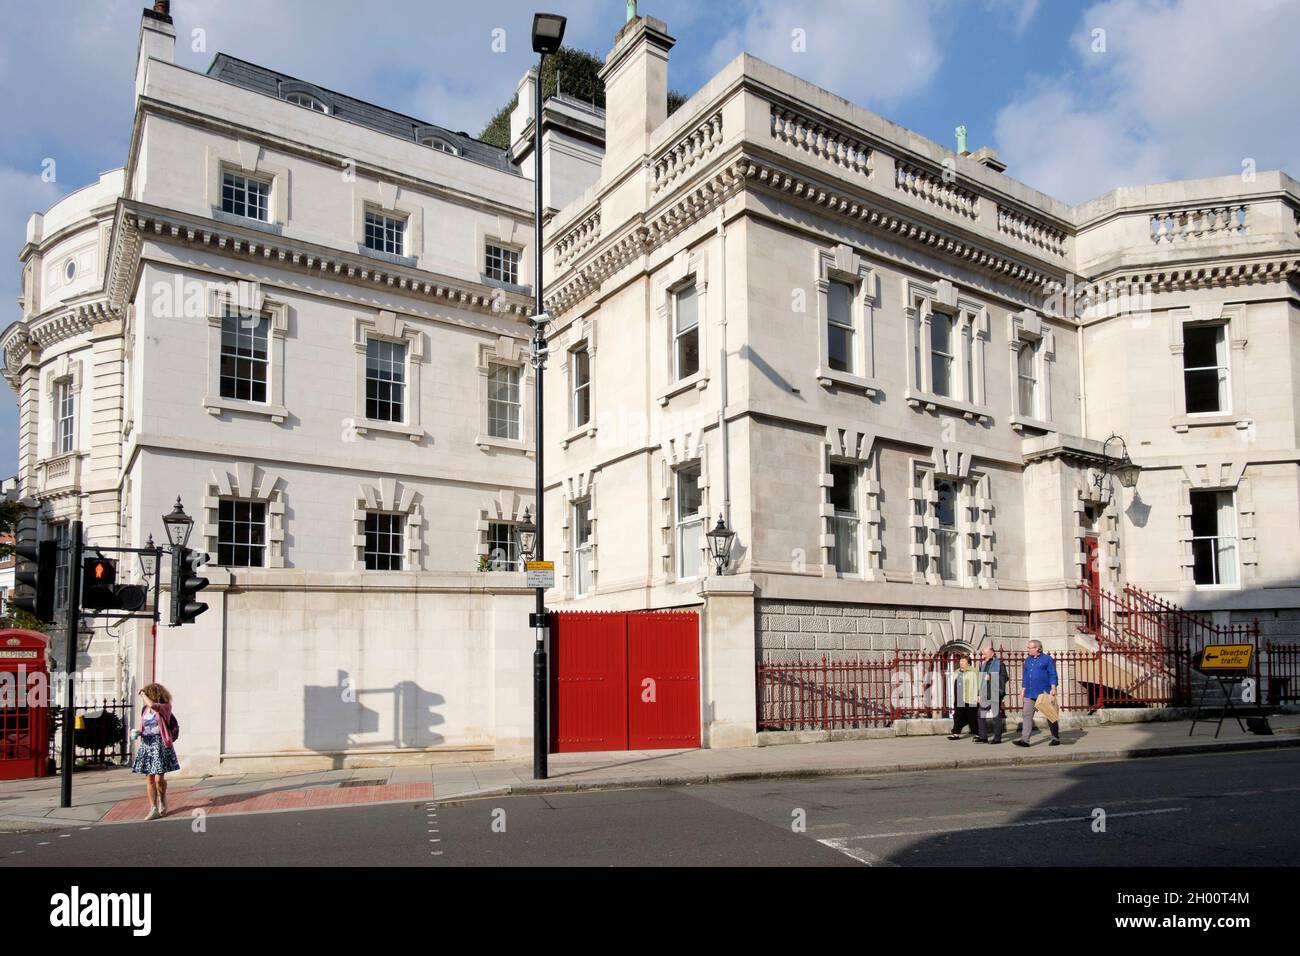 The Old Sessions House, Clerkenwell, Londra EC1. Foto Stock